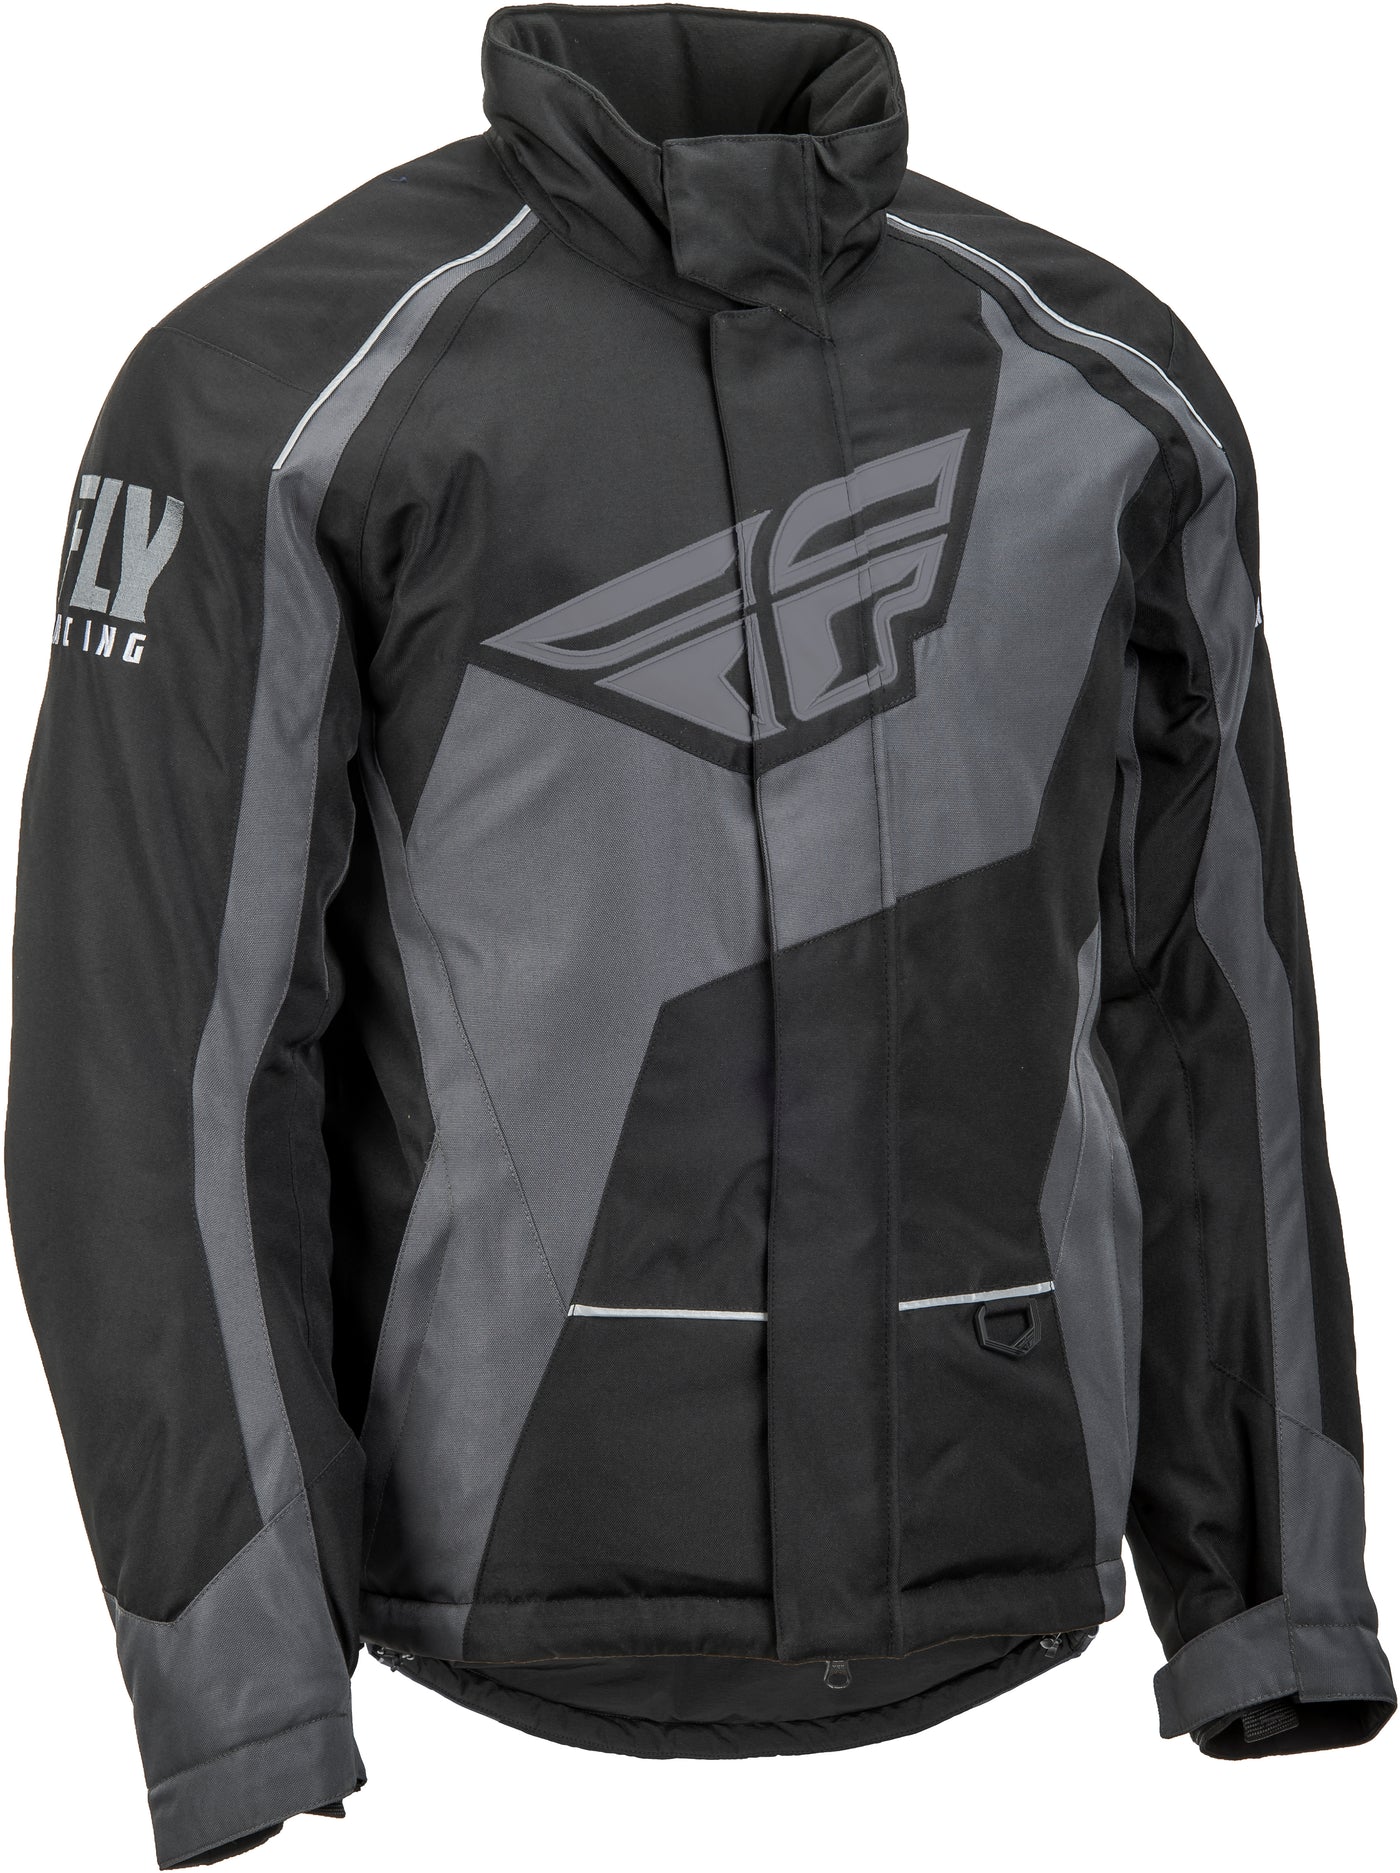 Fly Outpost Jacket Black/grey 5x